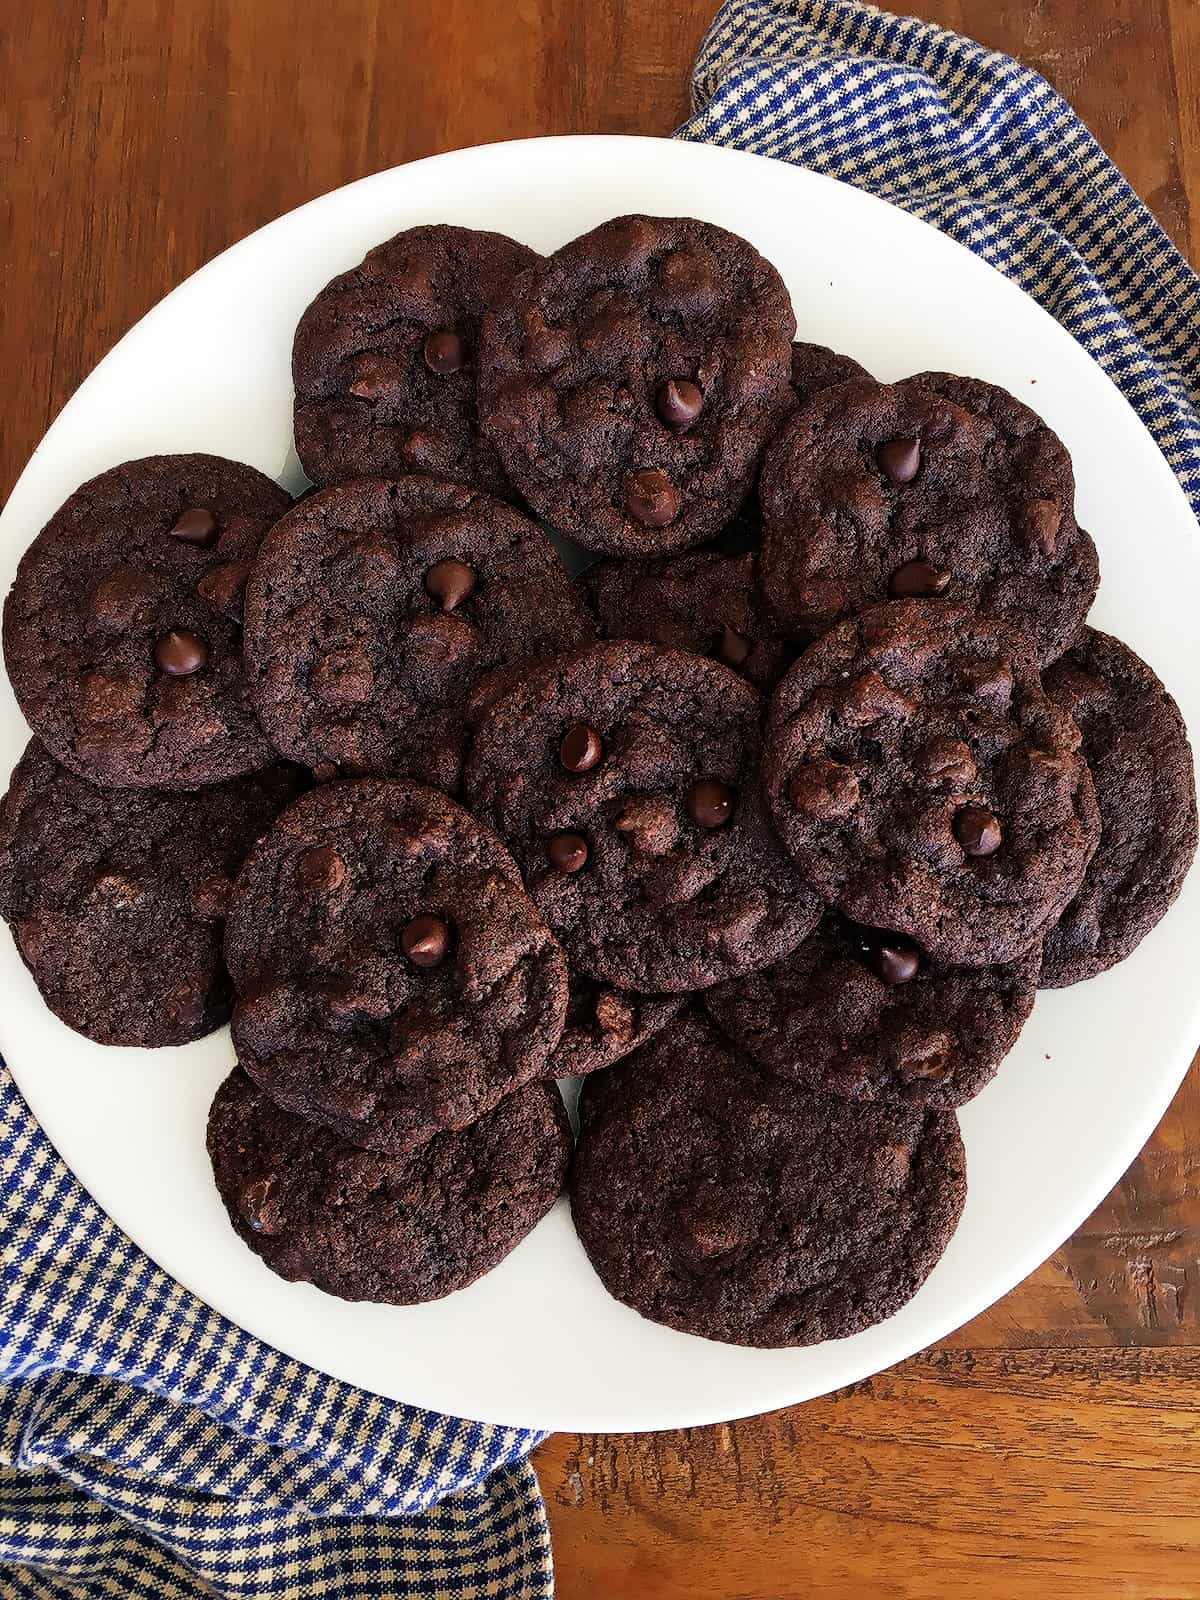 Freshly baked soft and chewy double chocolate chip cookies on a white serving plate atop a wood table